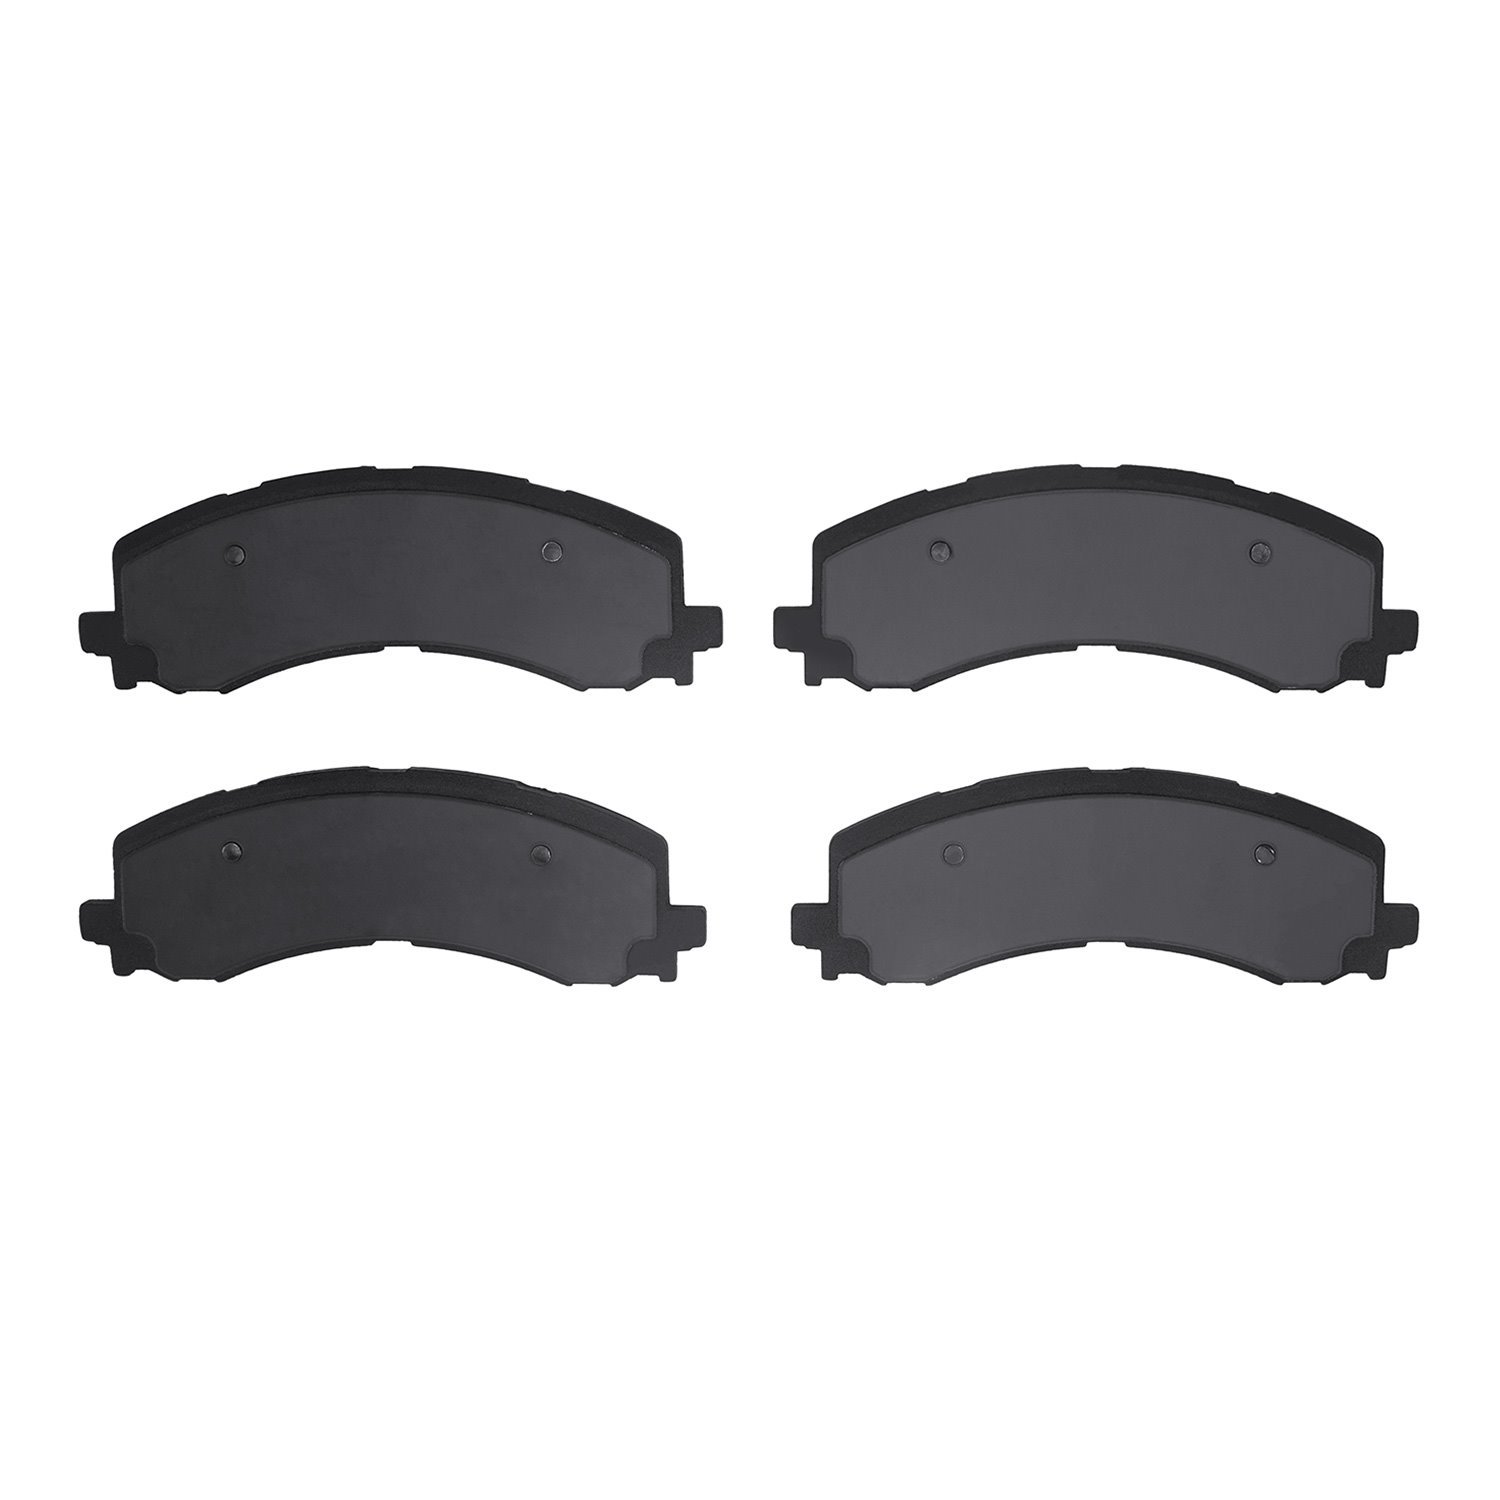 1310-2382-00 3000-Series Ceramic Brake Pads, Fits Select Ford/Lincoln/Mercury/Mazda, Position: Front